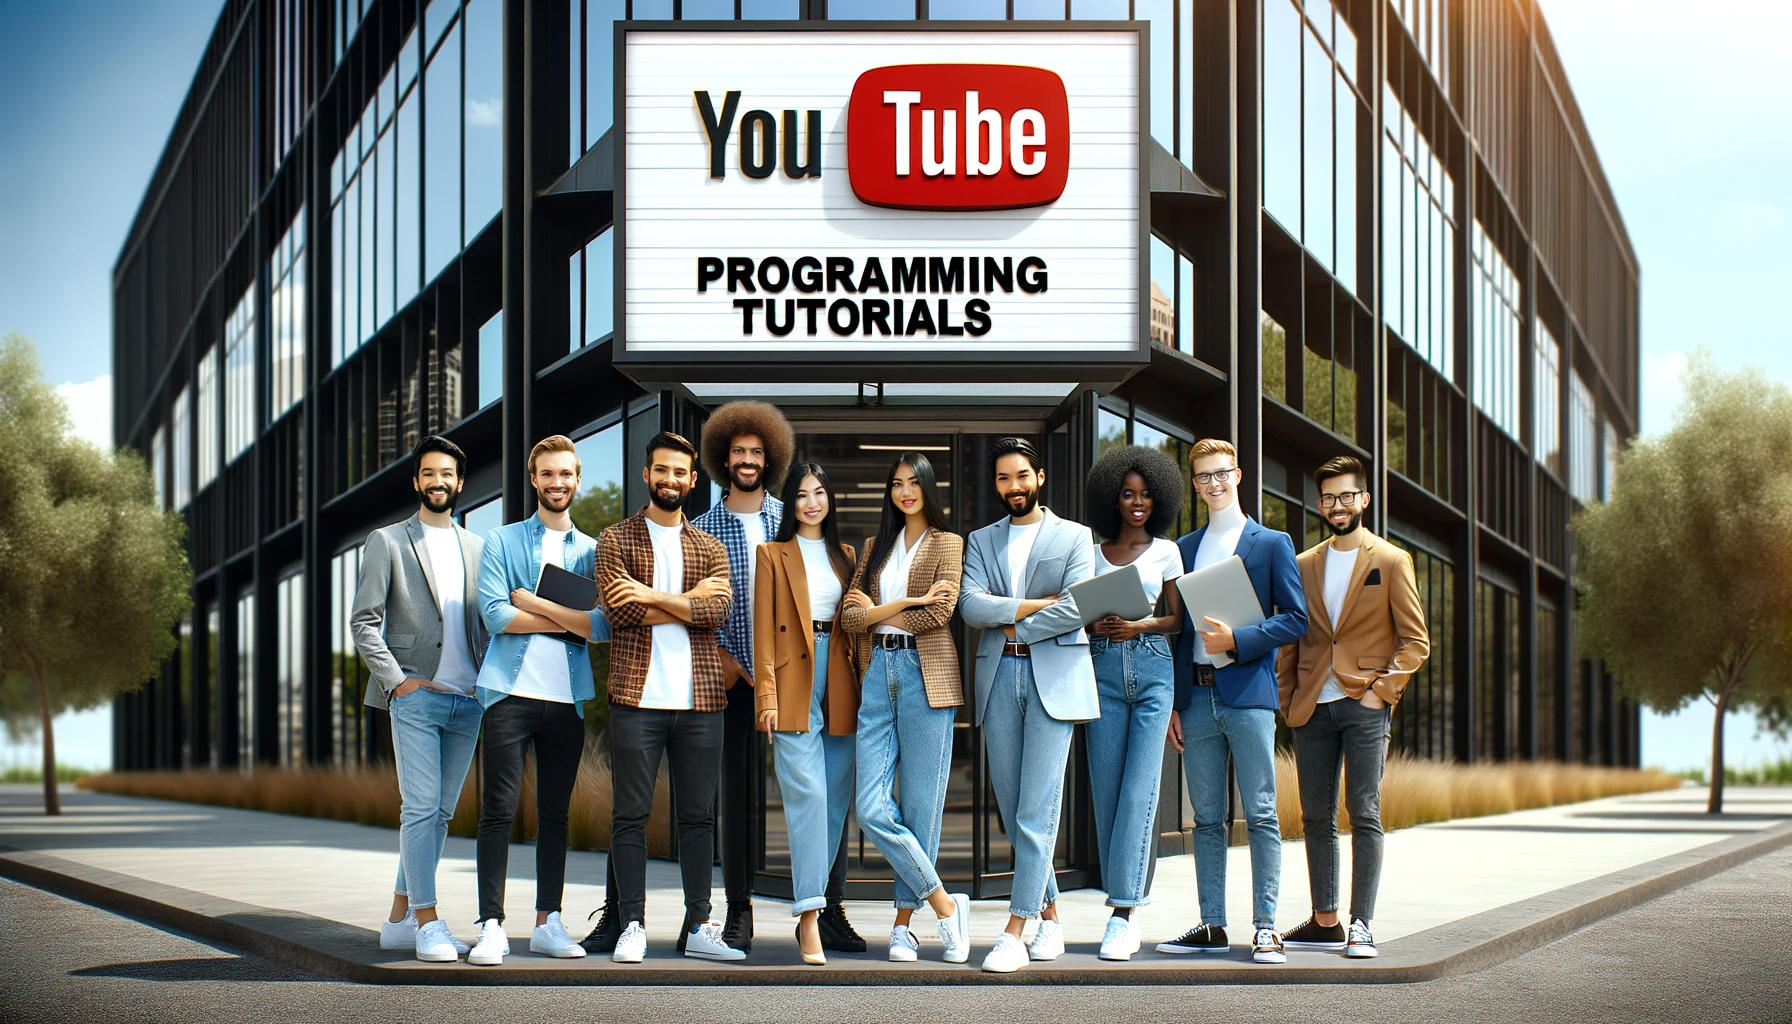 YouTube programming tutorial specialist team in front of their office building